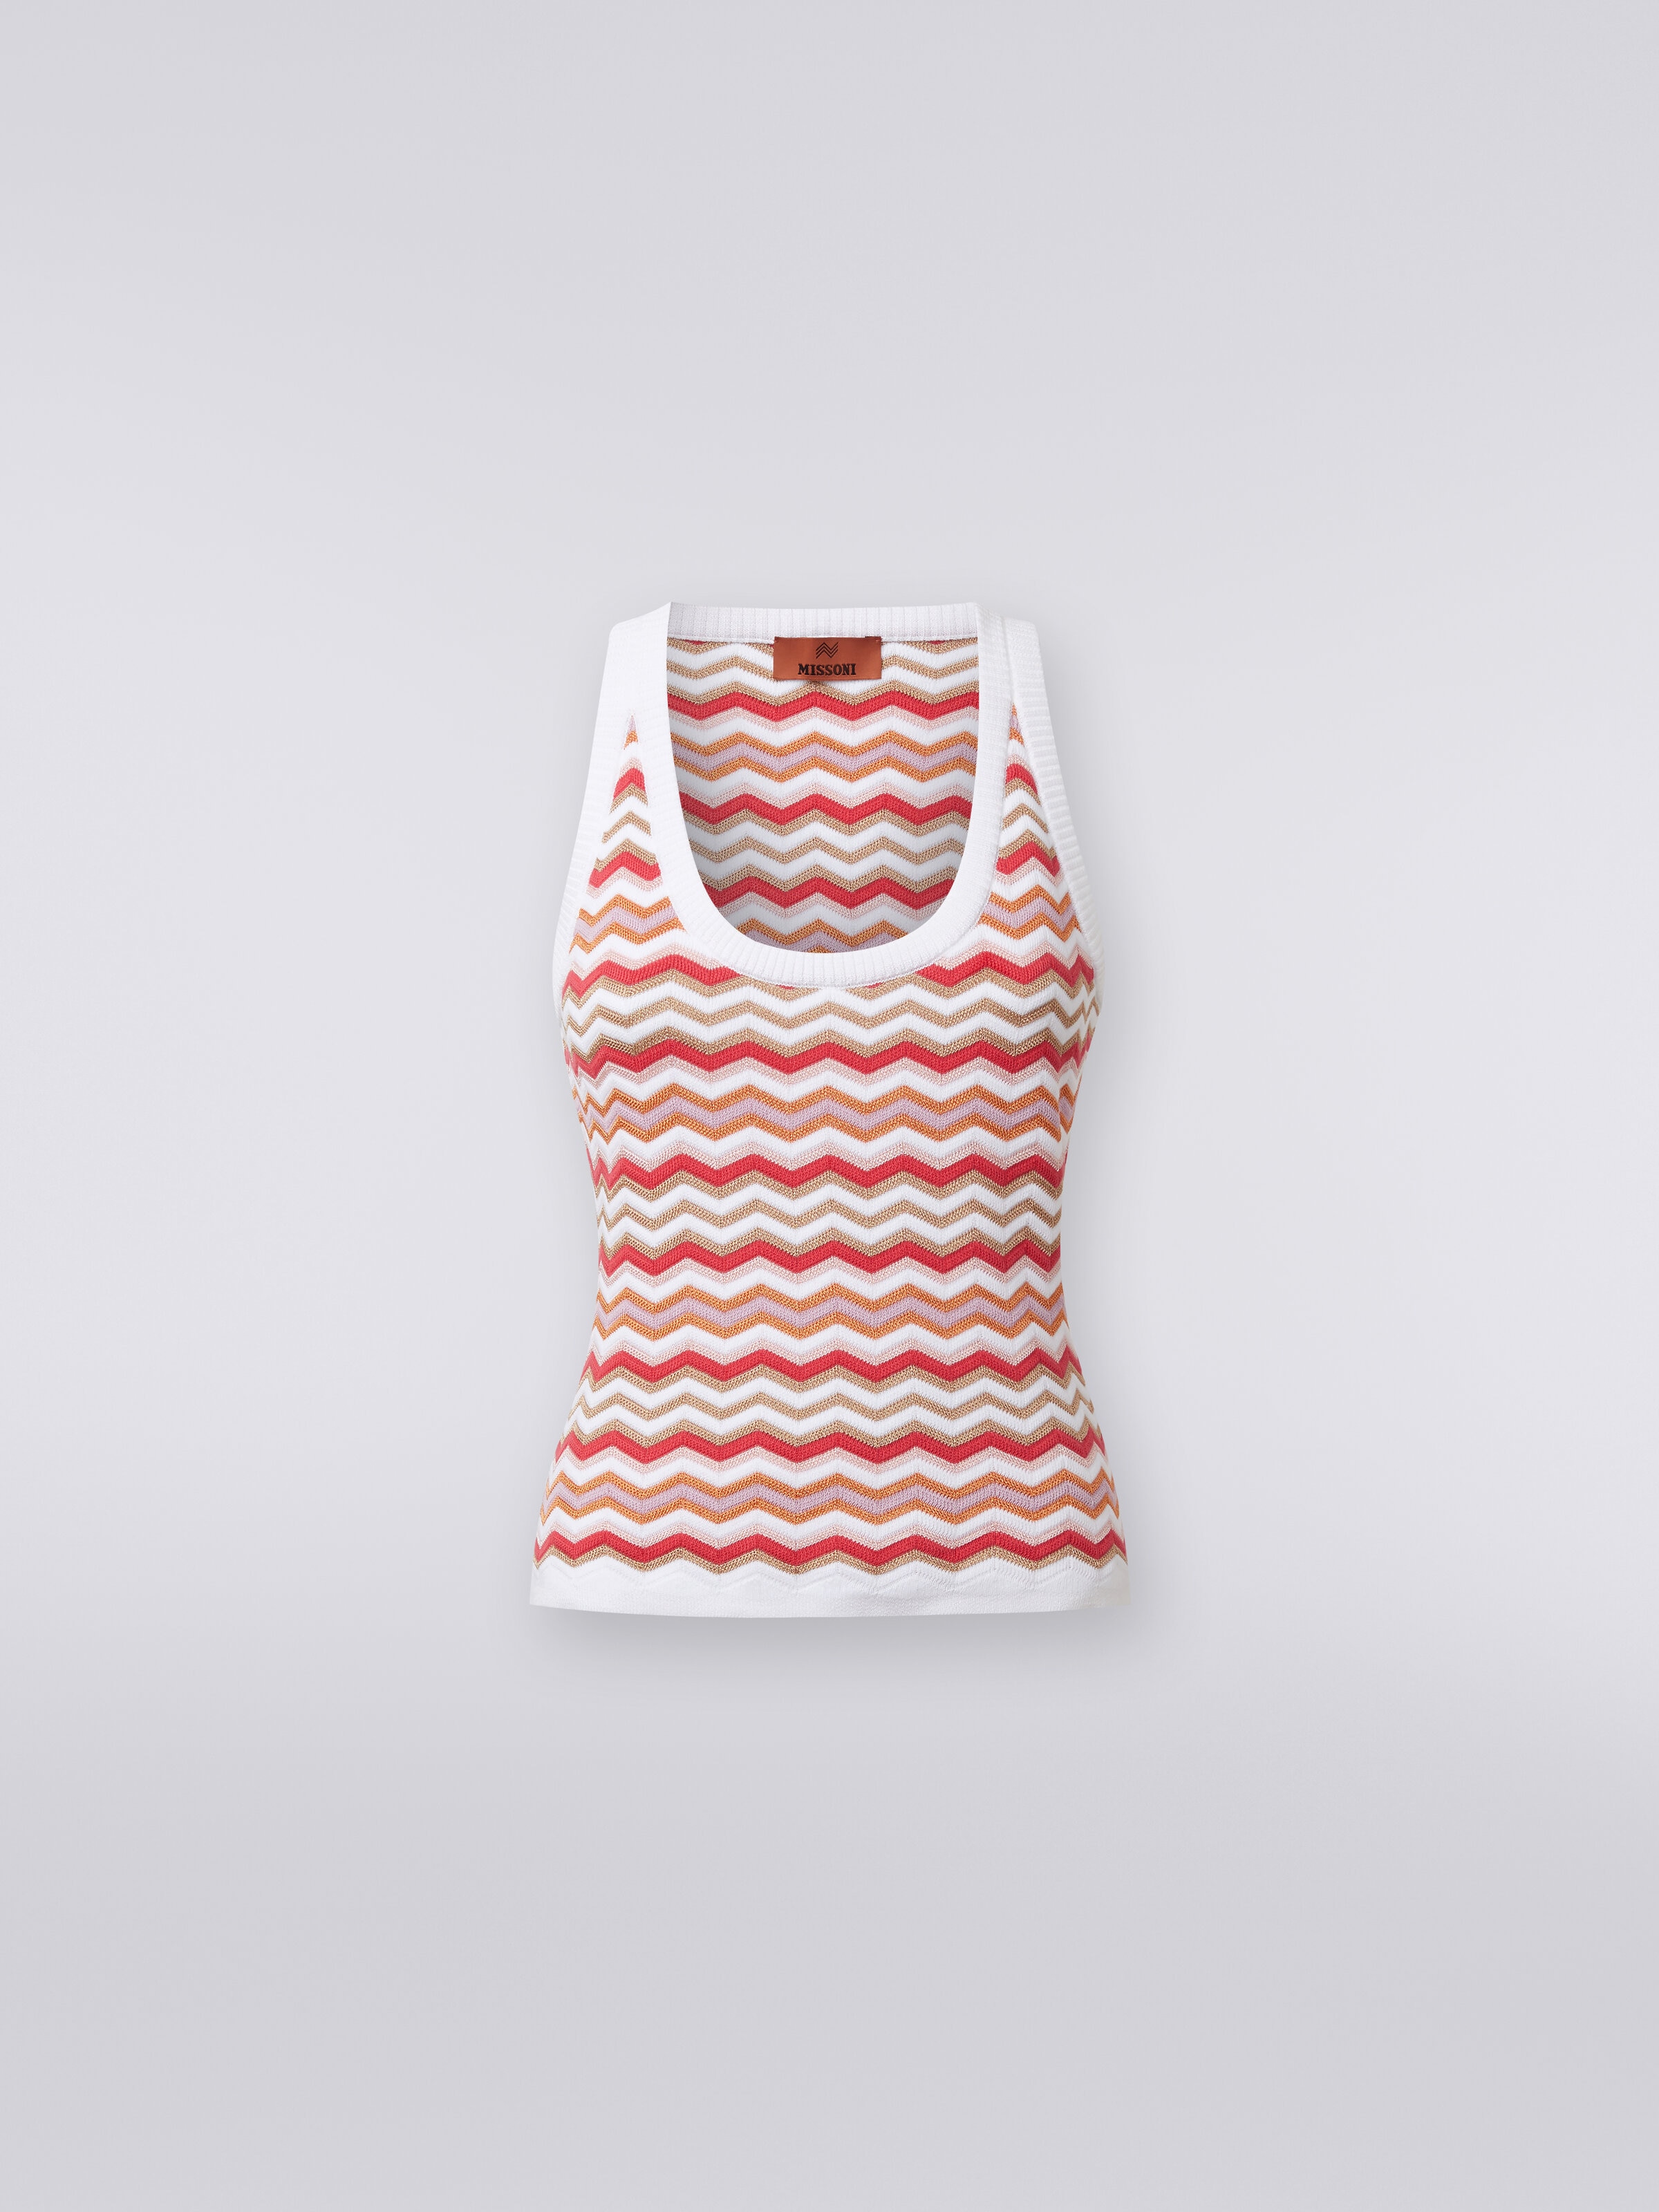 Tank top in zigzag viscose and cotton knit, Multicoloured  - 0